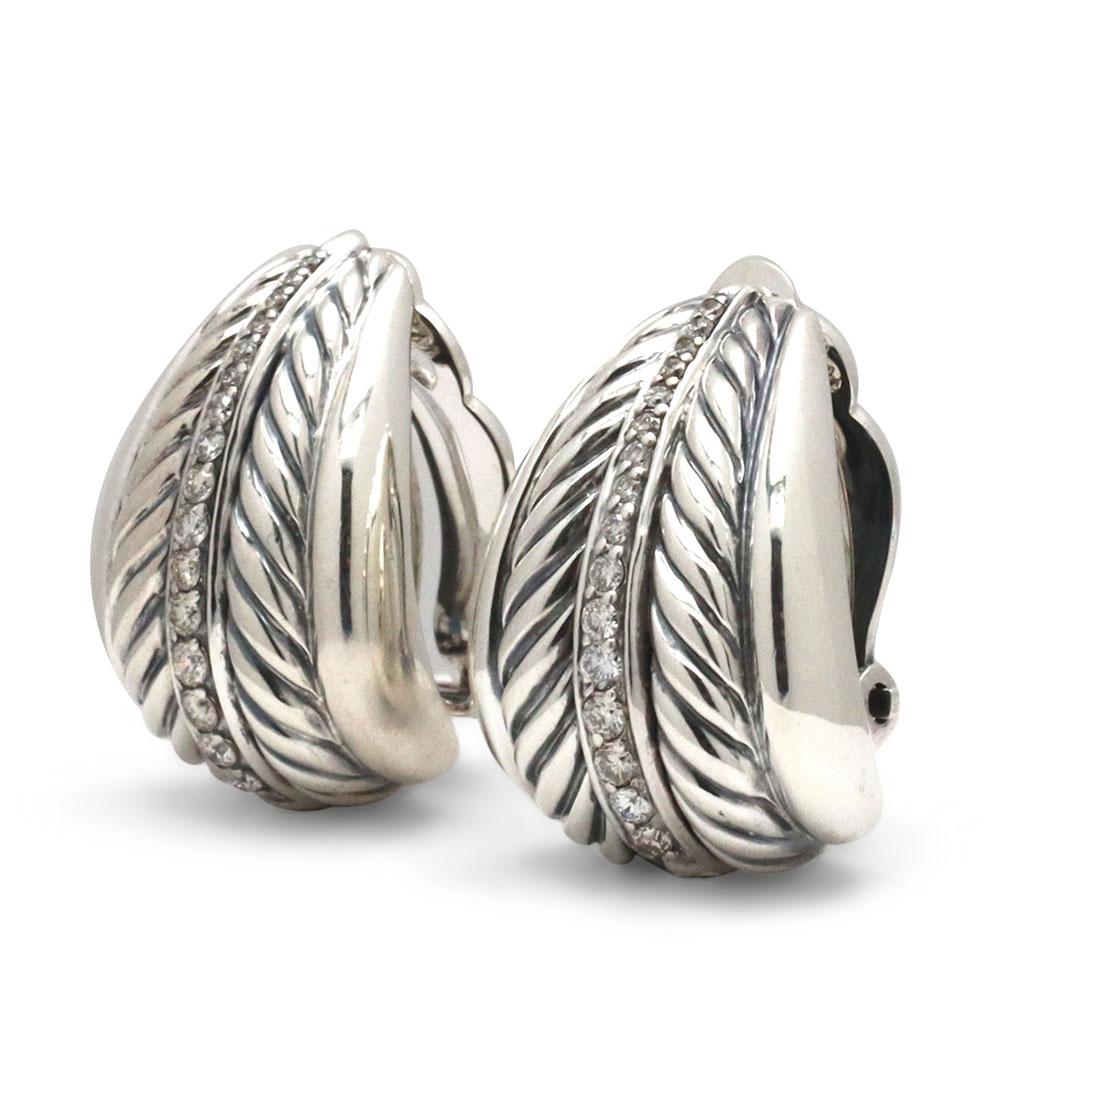 Authentic David Yurman cable earrings crafted in Sterling Silver a row of round brilliant diamonds is situated in the center of Yurman's signature cable design. The pair has an estimated total carat weight of .36ct. The earrings measure .95 inches